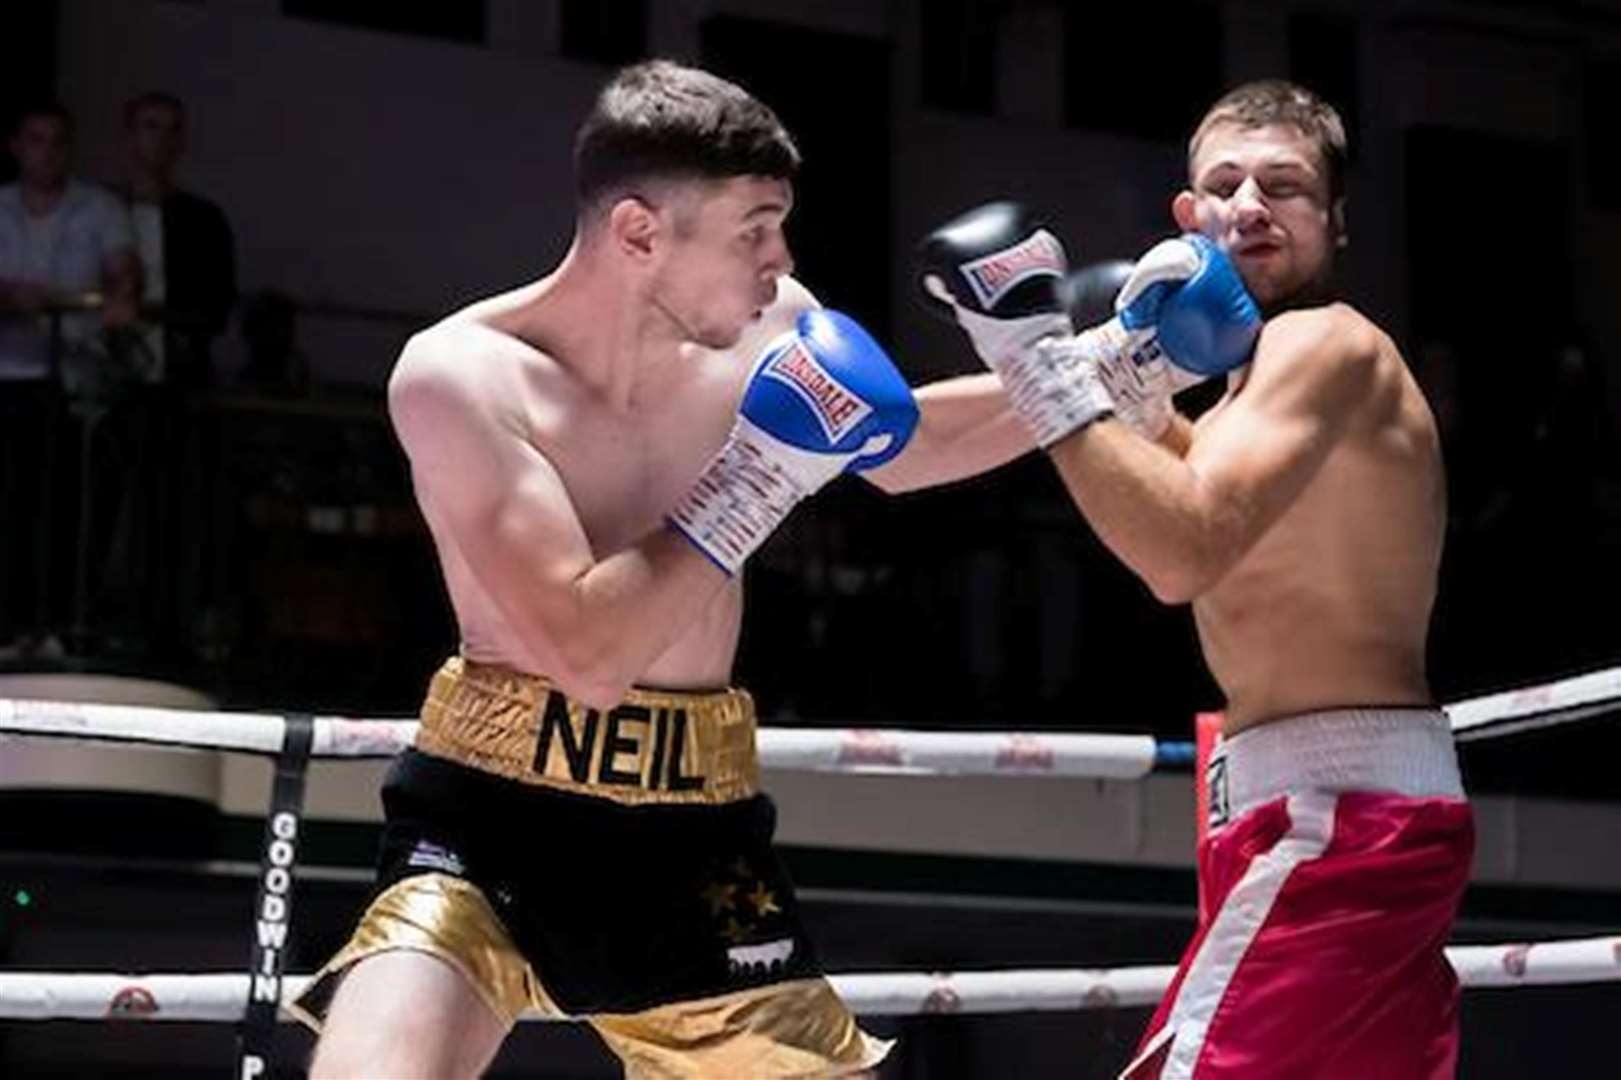 Neil Parry fighting Teodor Boyadjiev in September 2018. Goodwin Boxing. Picture: Simon Downing